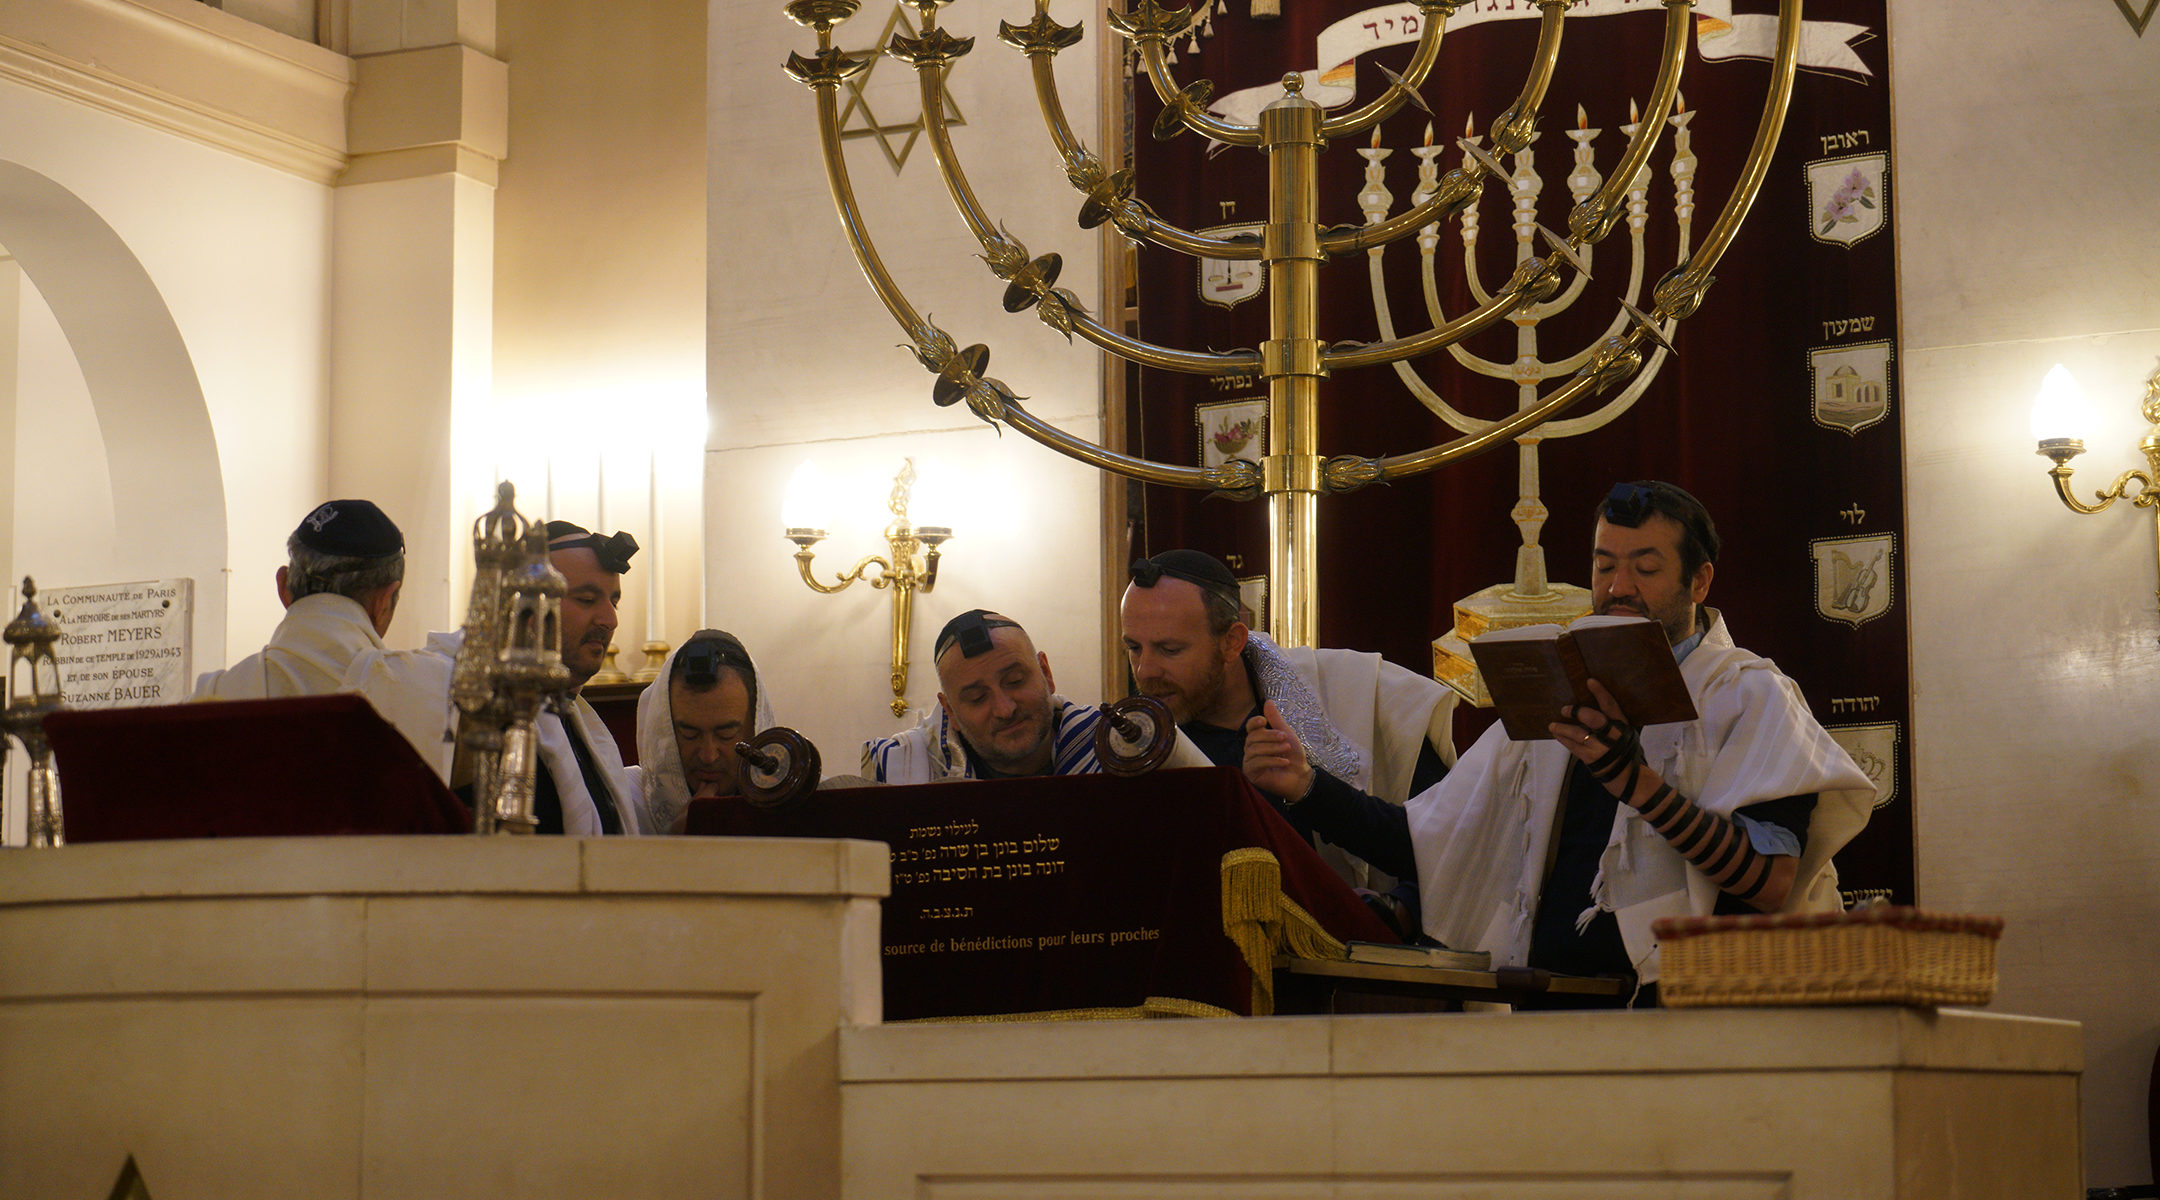 Rabbi Michael Azoulay, second from right, reading the Torah with congregants at the synagogue of Neuilly-sur-Seine, Dec. 11, 2017. (Cnaan Liphshiz)